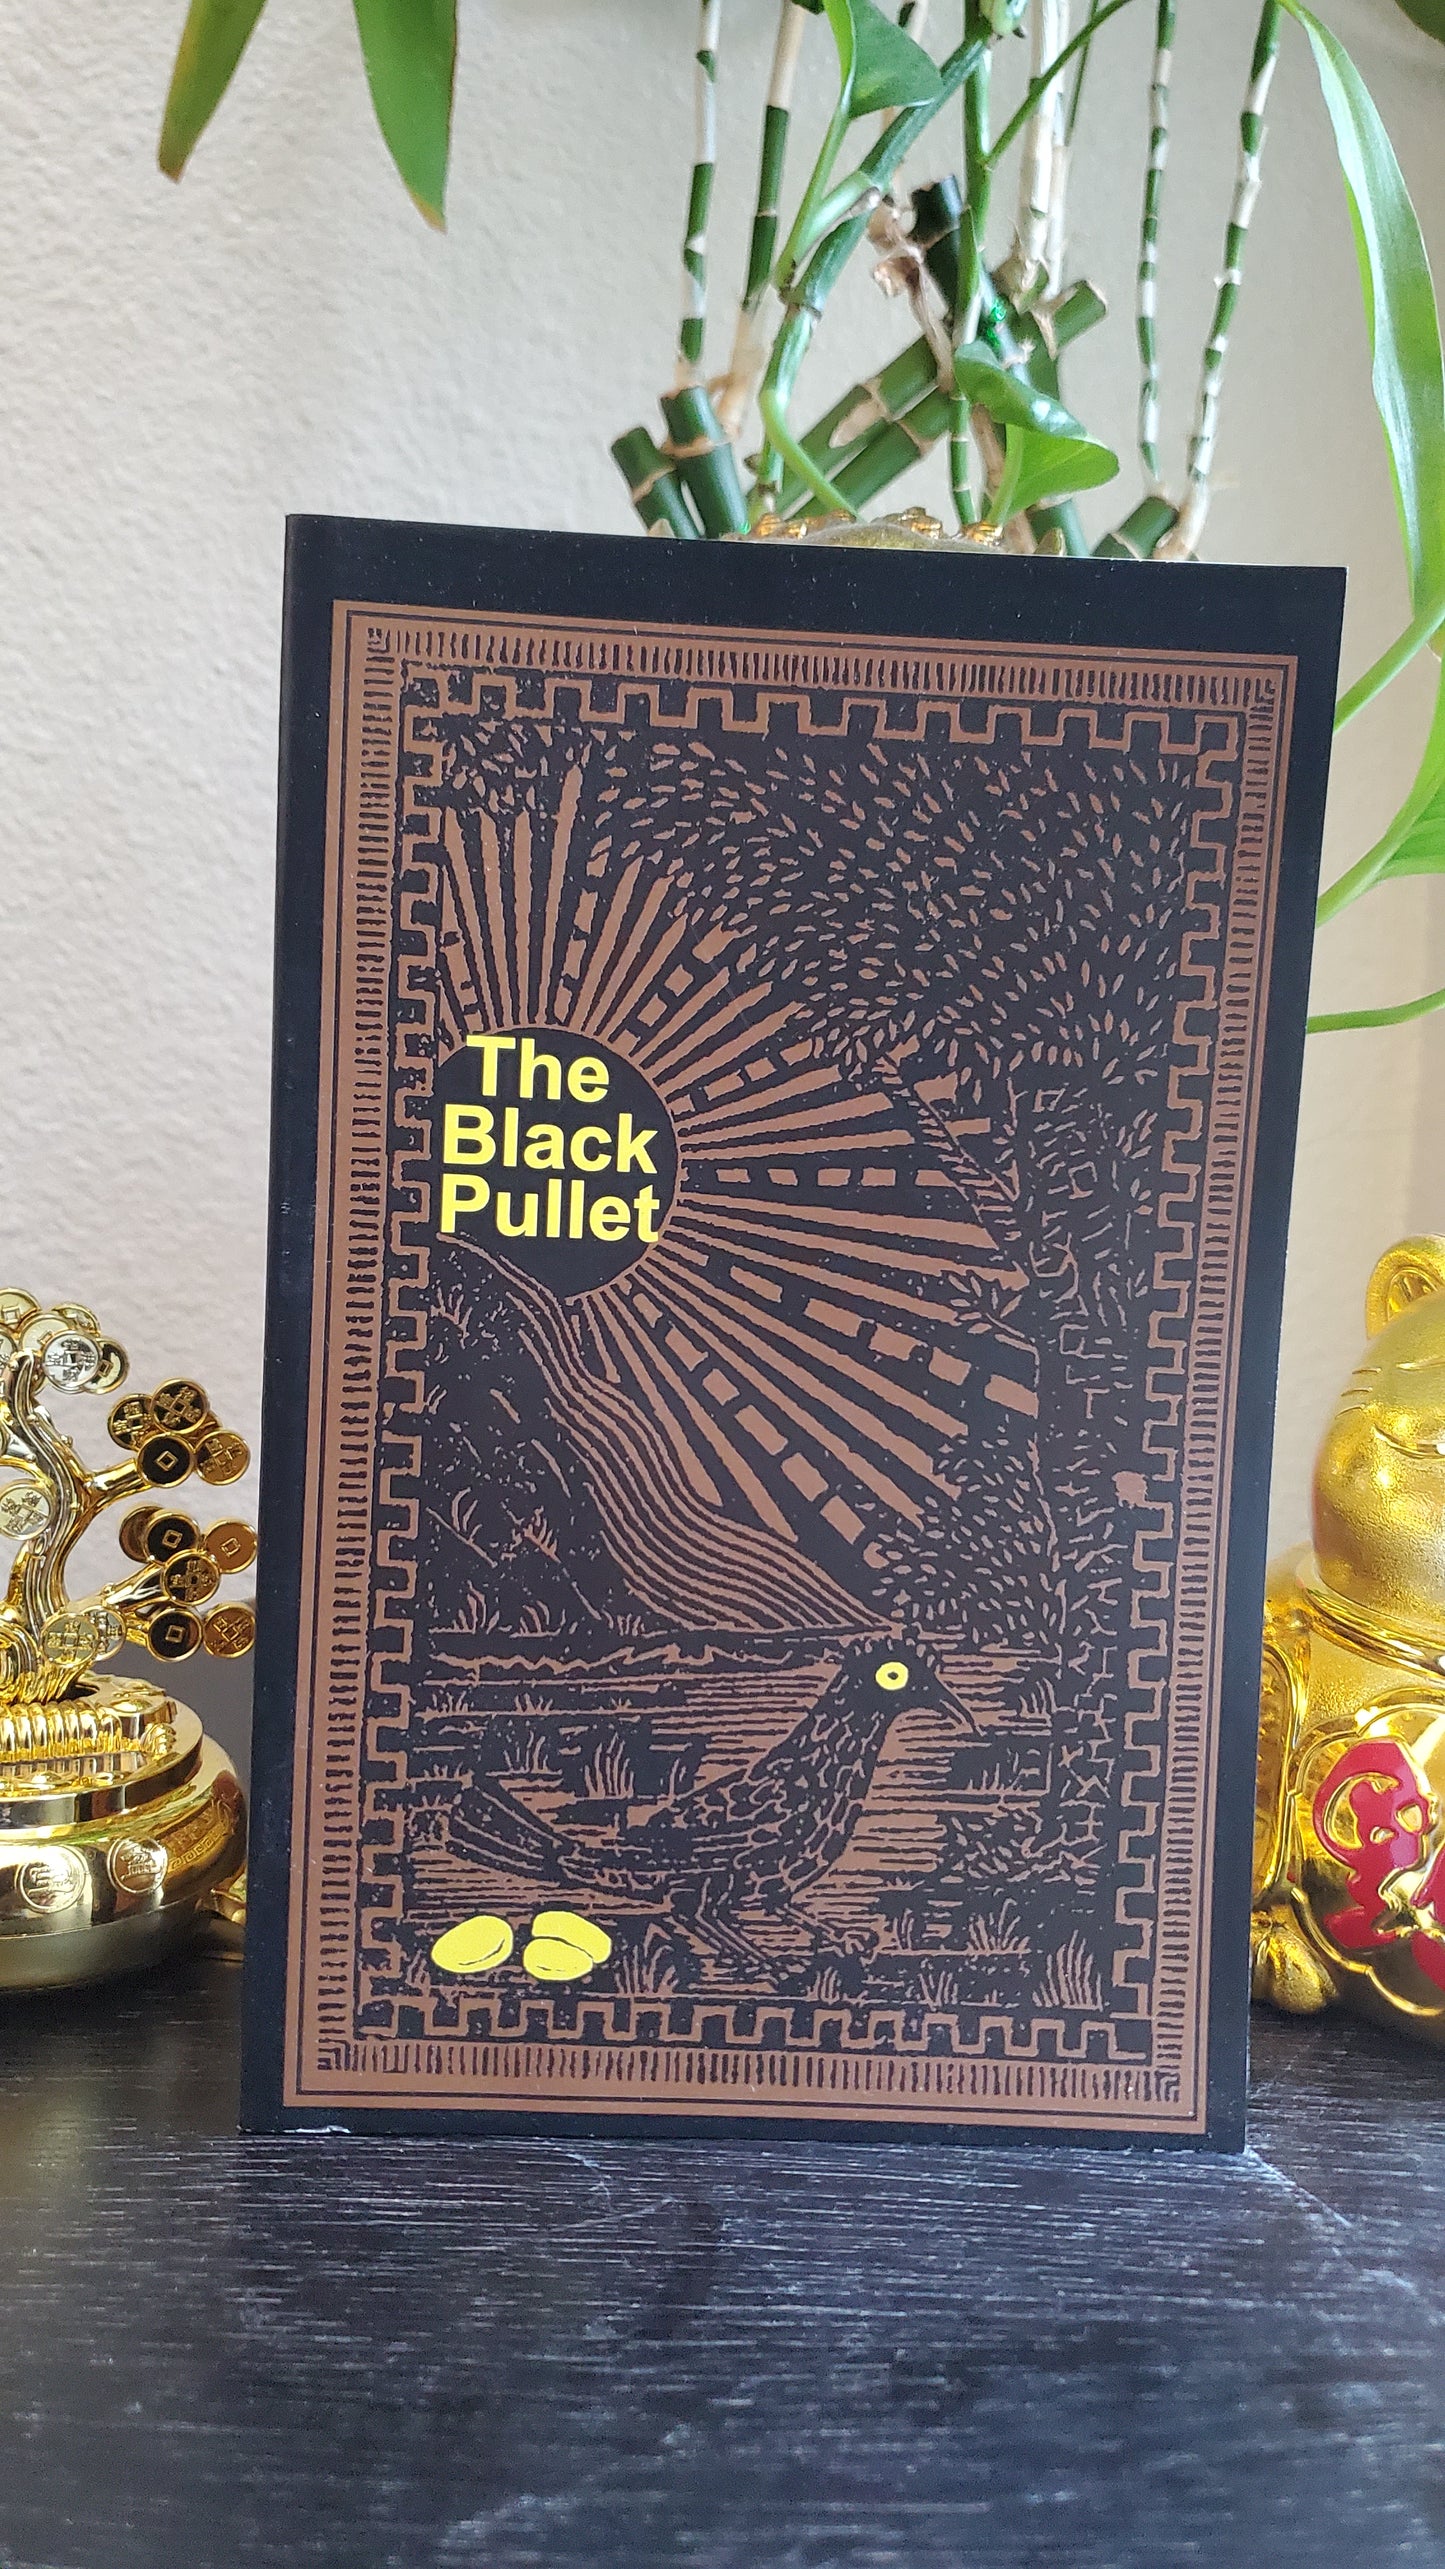 The Black Pullet: Science of Magical Talisman Paperback #OccultBestSeller #TheBlackPullet #TalismanicMagick #Occult